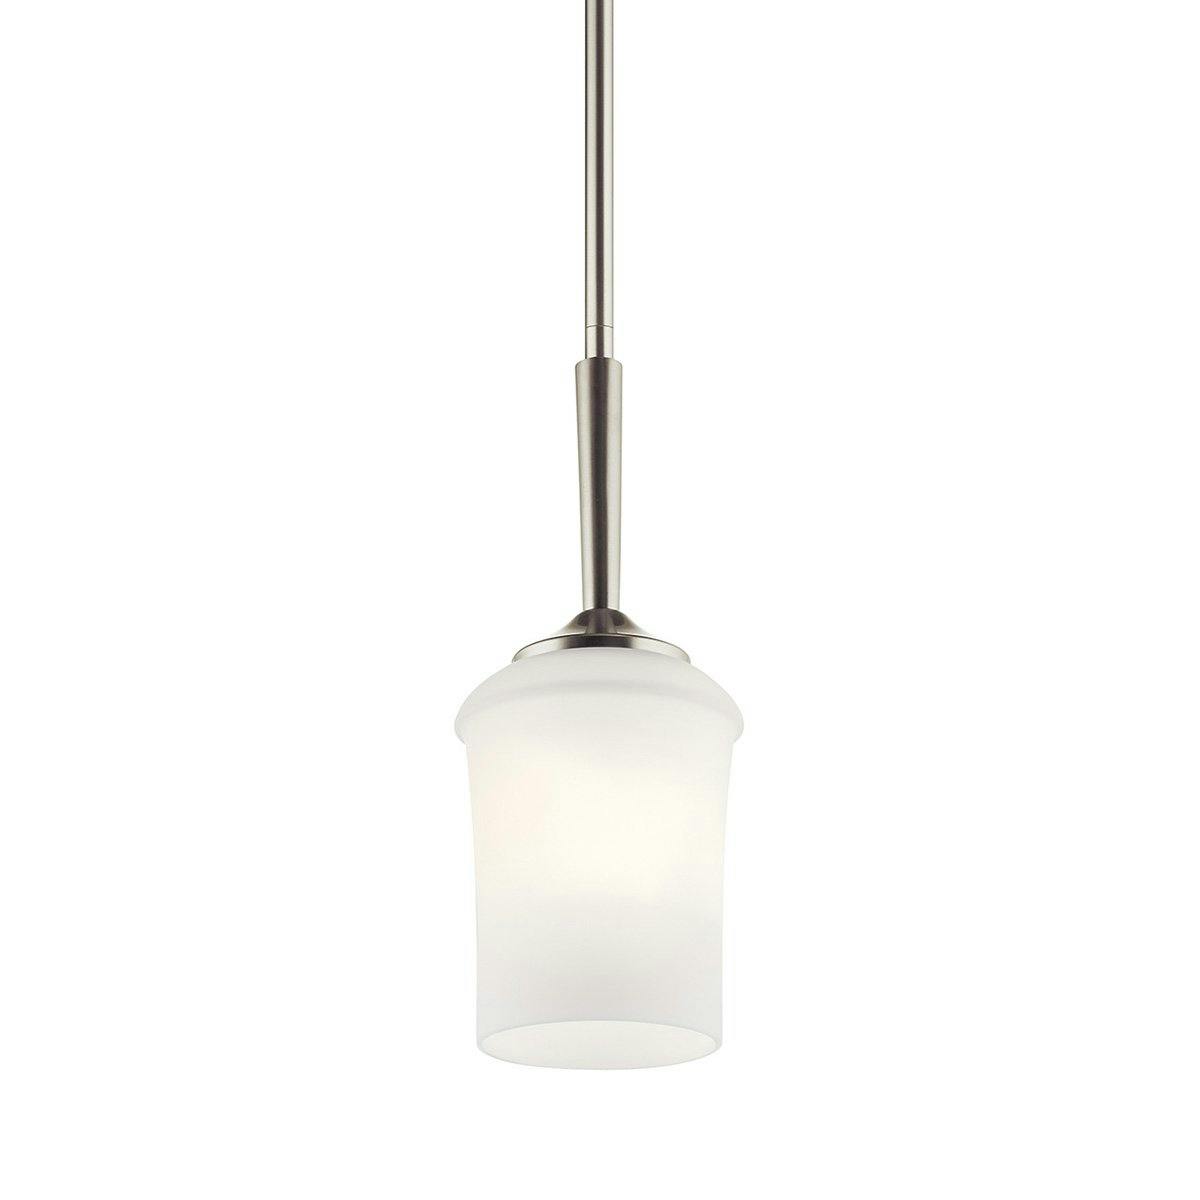 Aubrey Mini Pendant in Brushed Nickel without the canopy on a white background